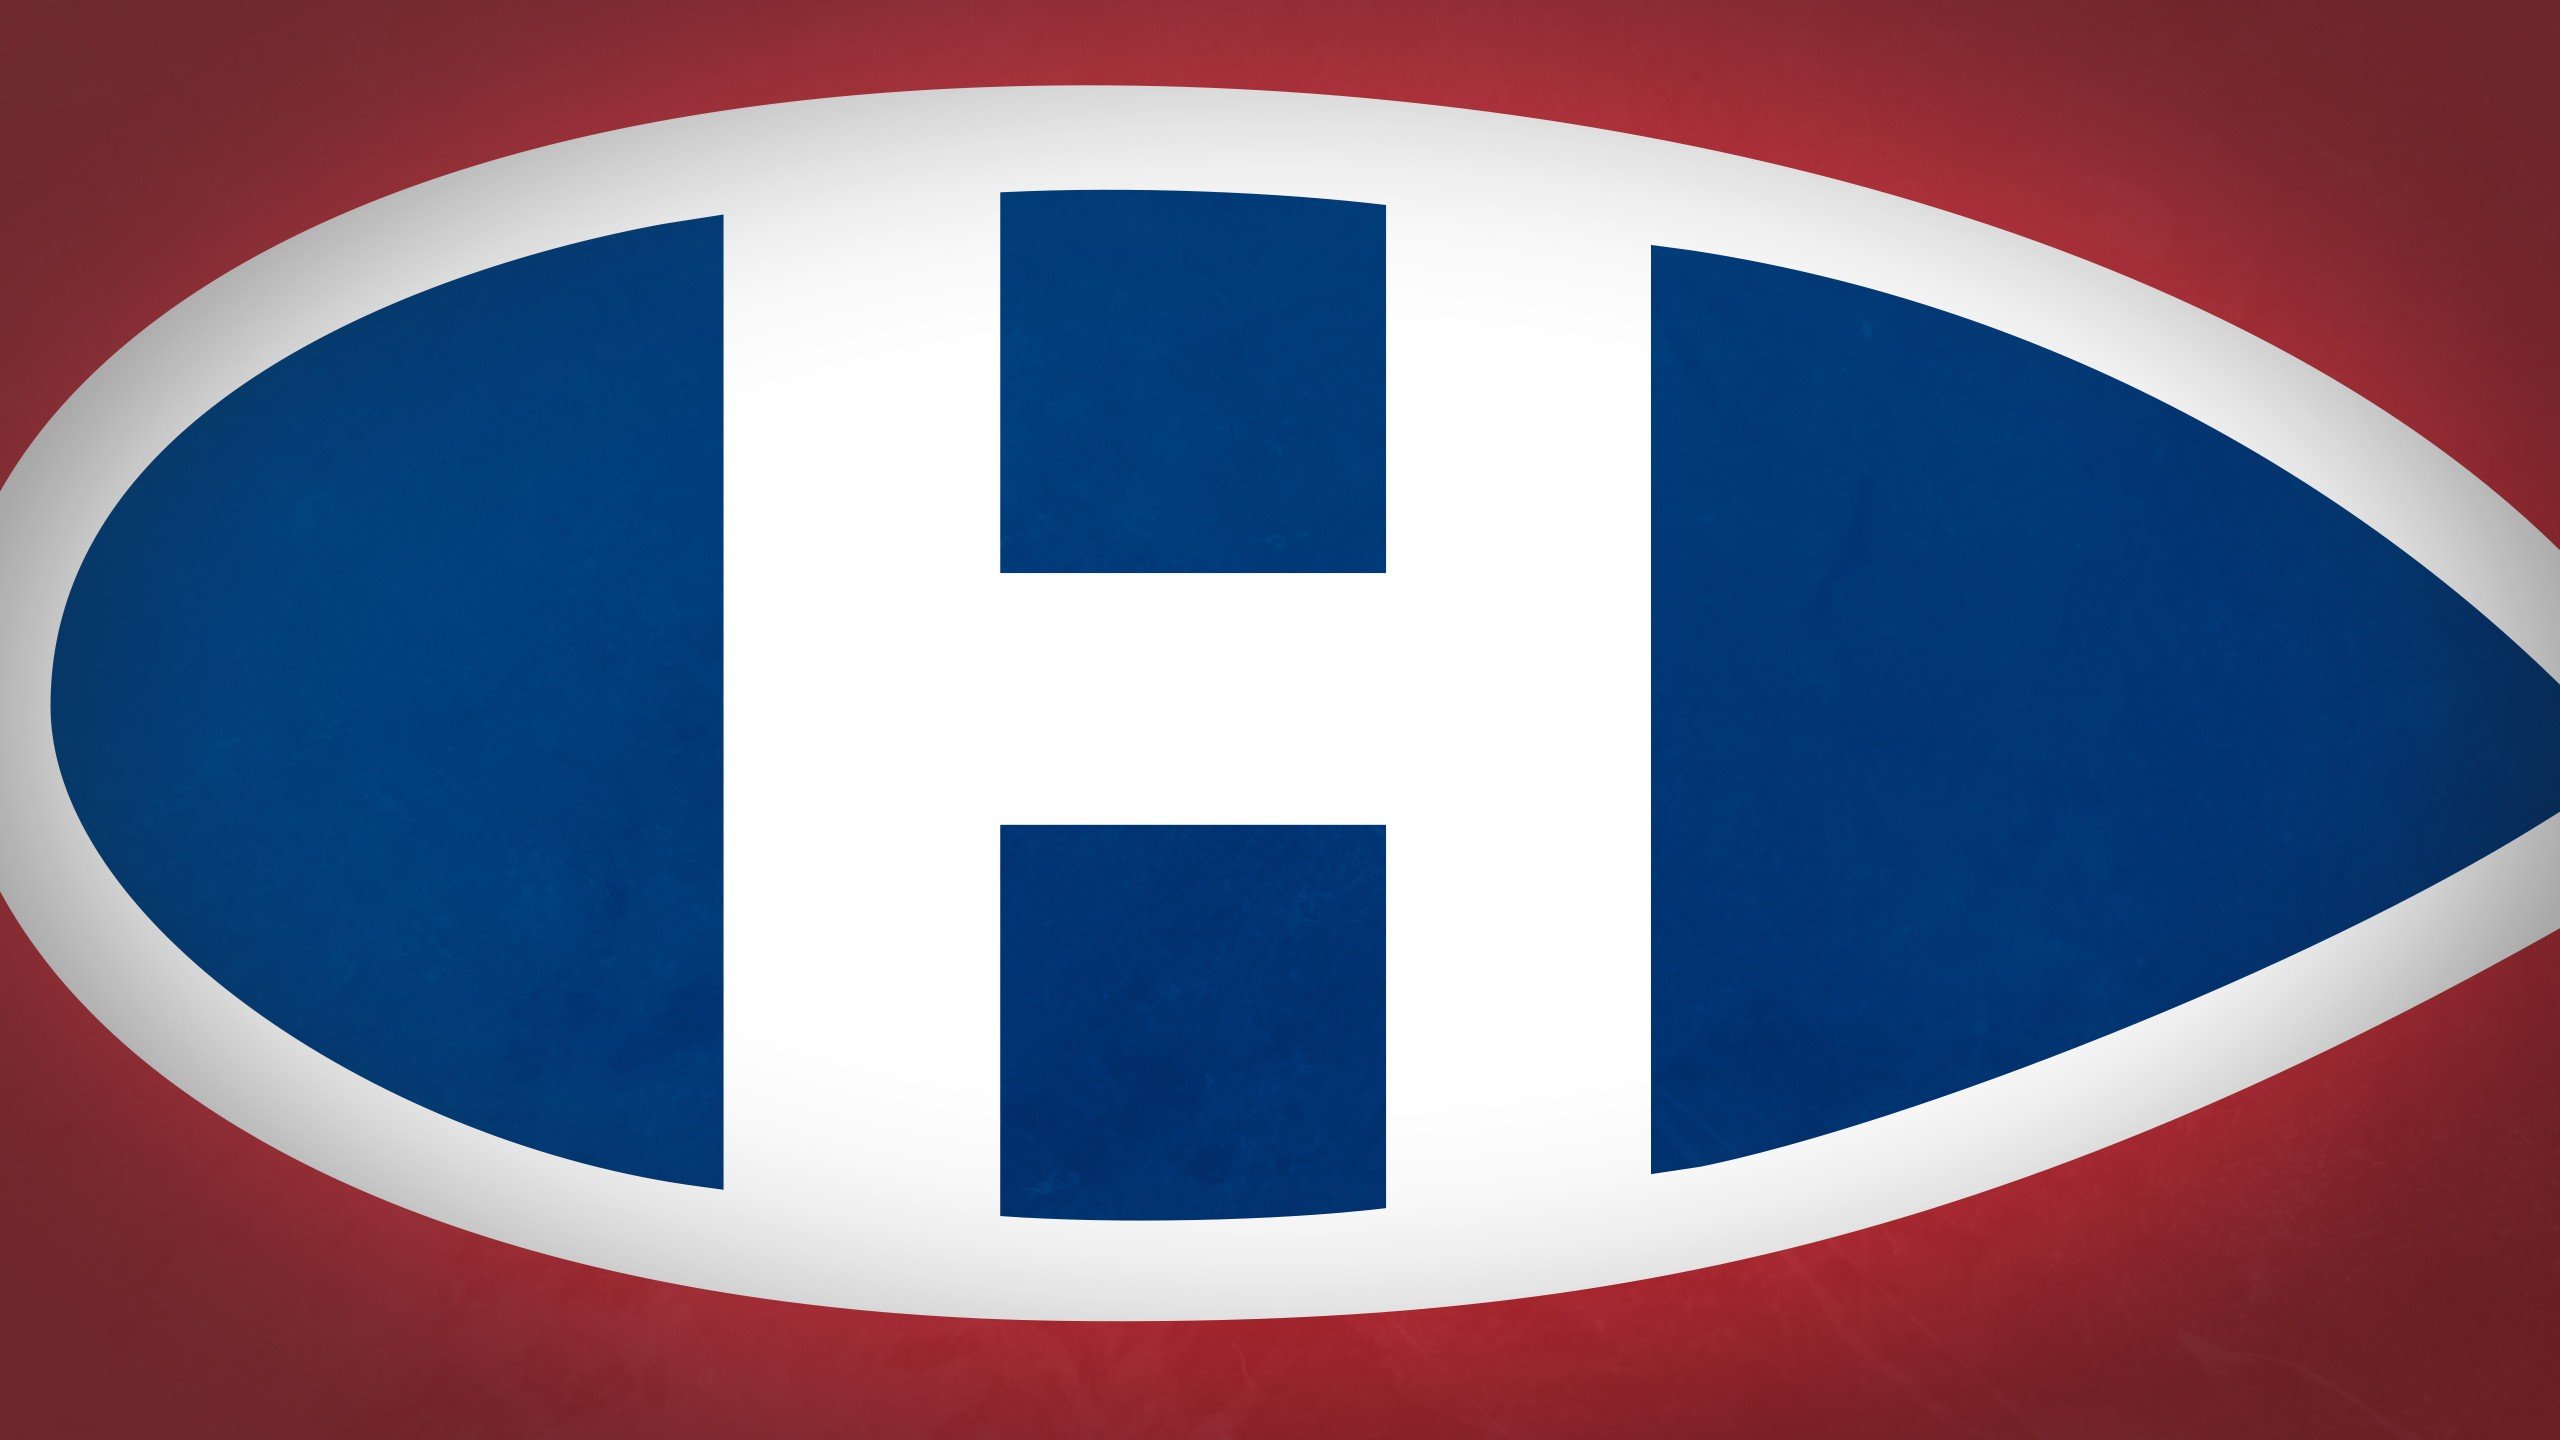 Download hd 2560x1440 Montreal Canadiens desktop background ID:226260 for free